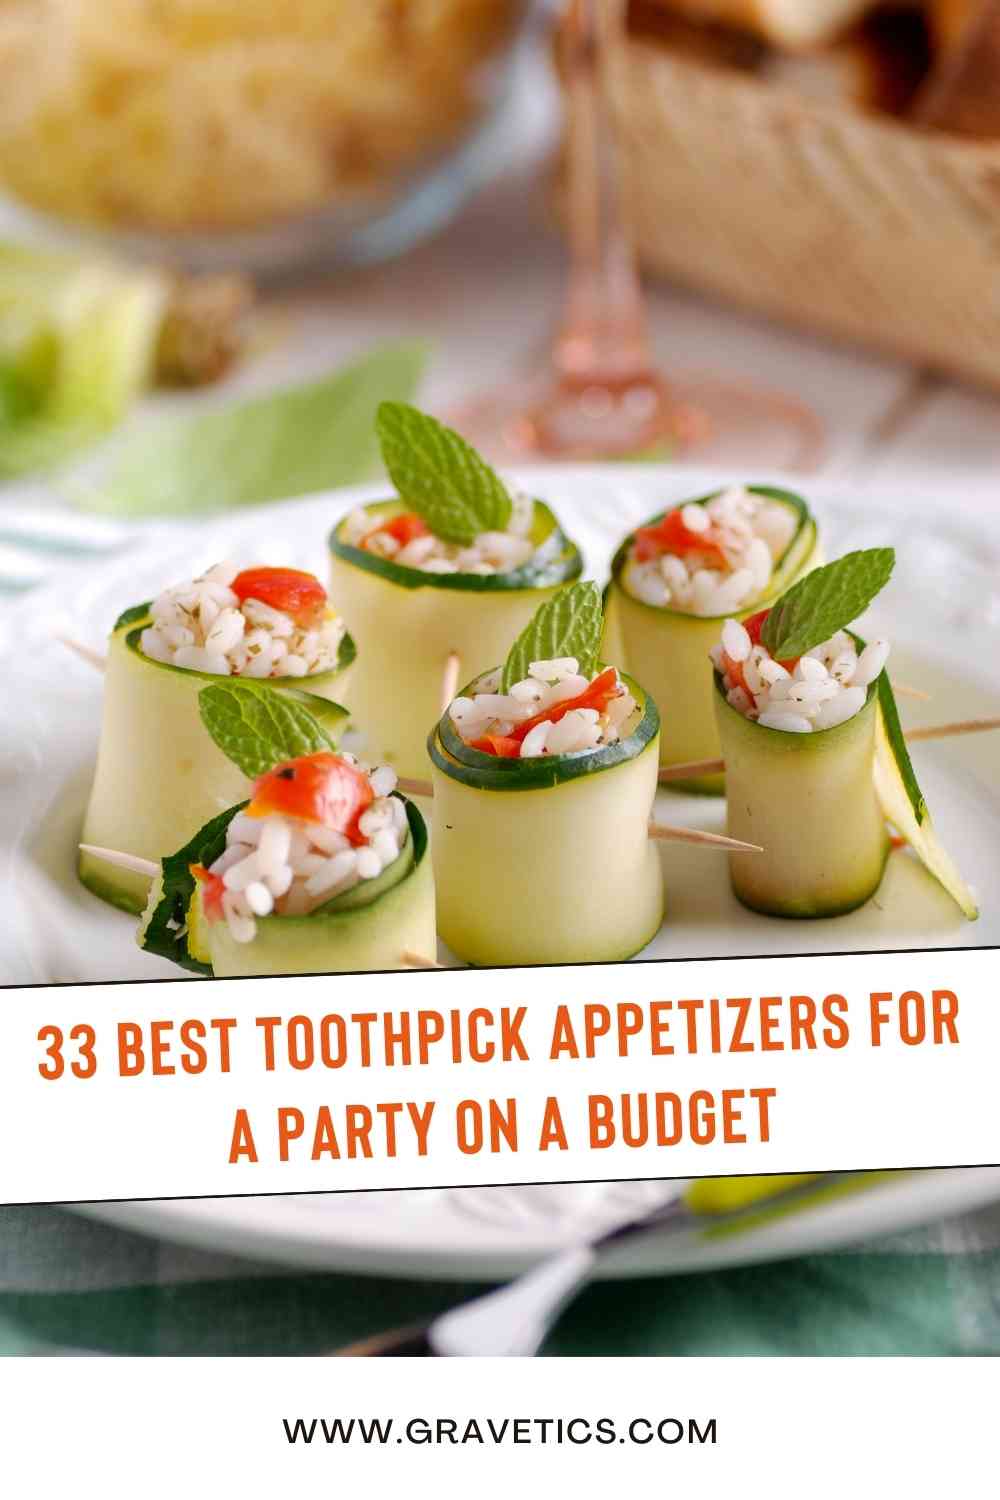 33 Best Toothpick Appetizers for a Party on a Budget